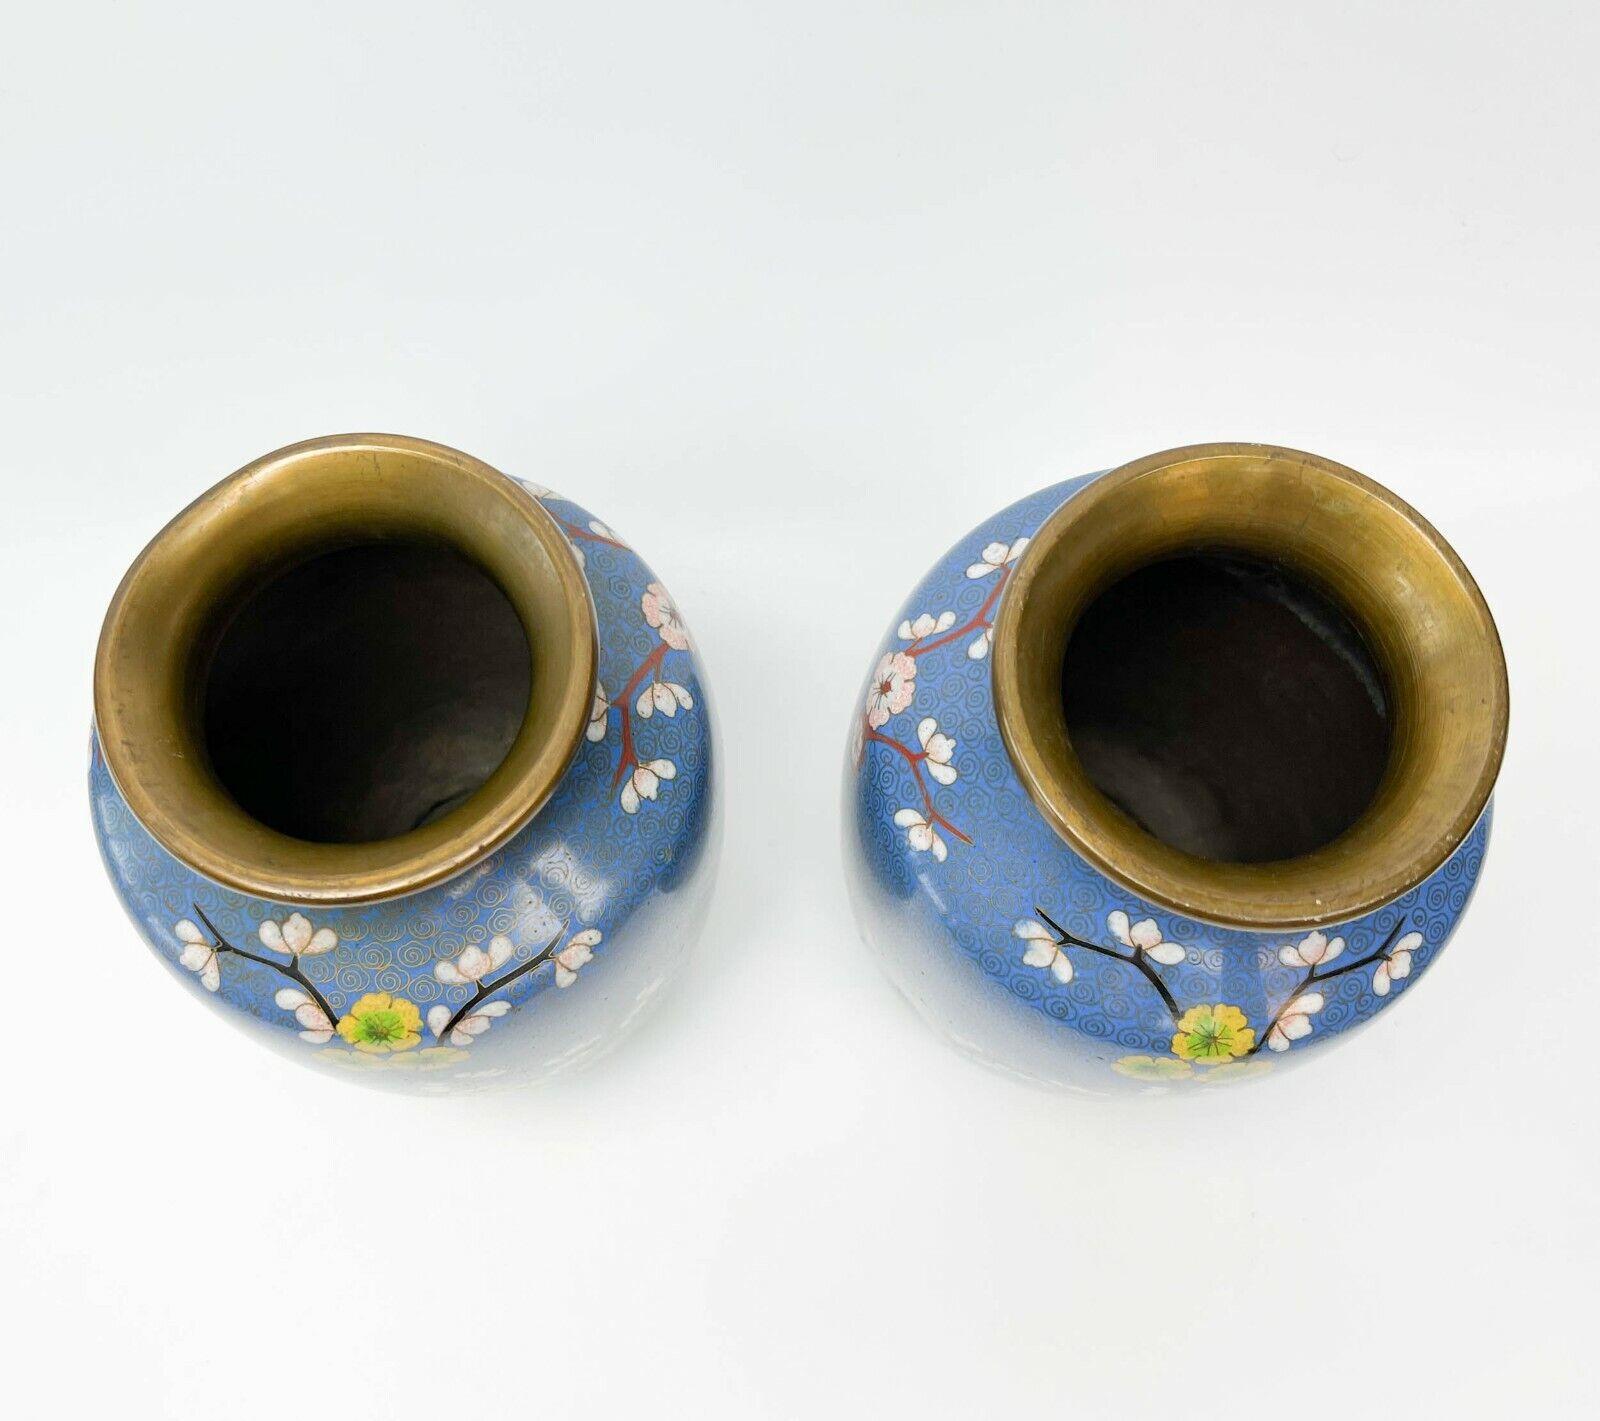 Bronzed Pair of Chinese Cloisonne Enamel Enamel and Bronze Mounted Vases Penny Marshall For Sale